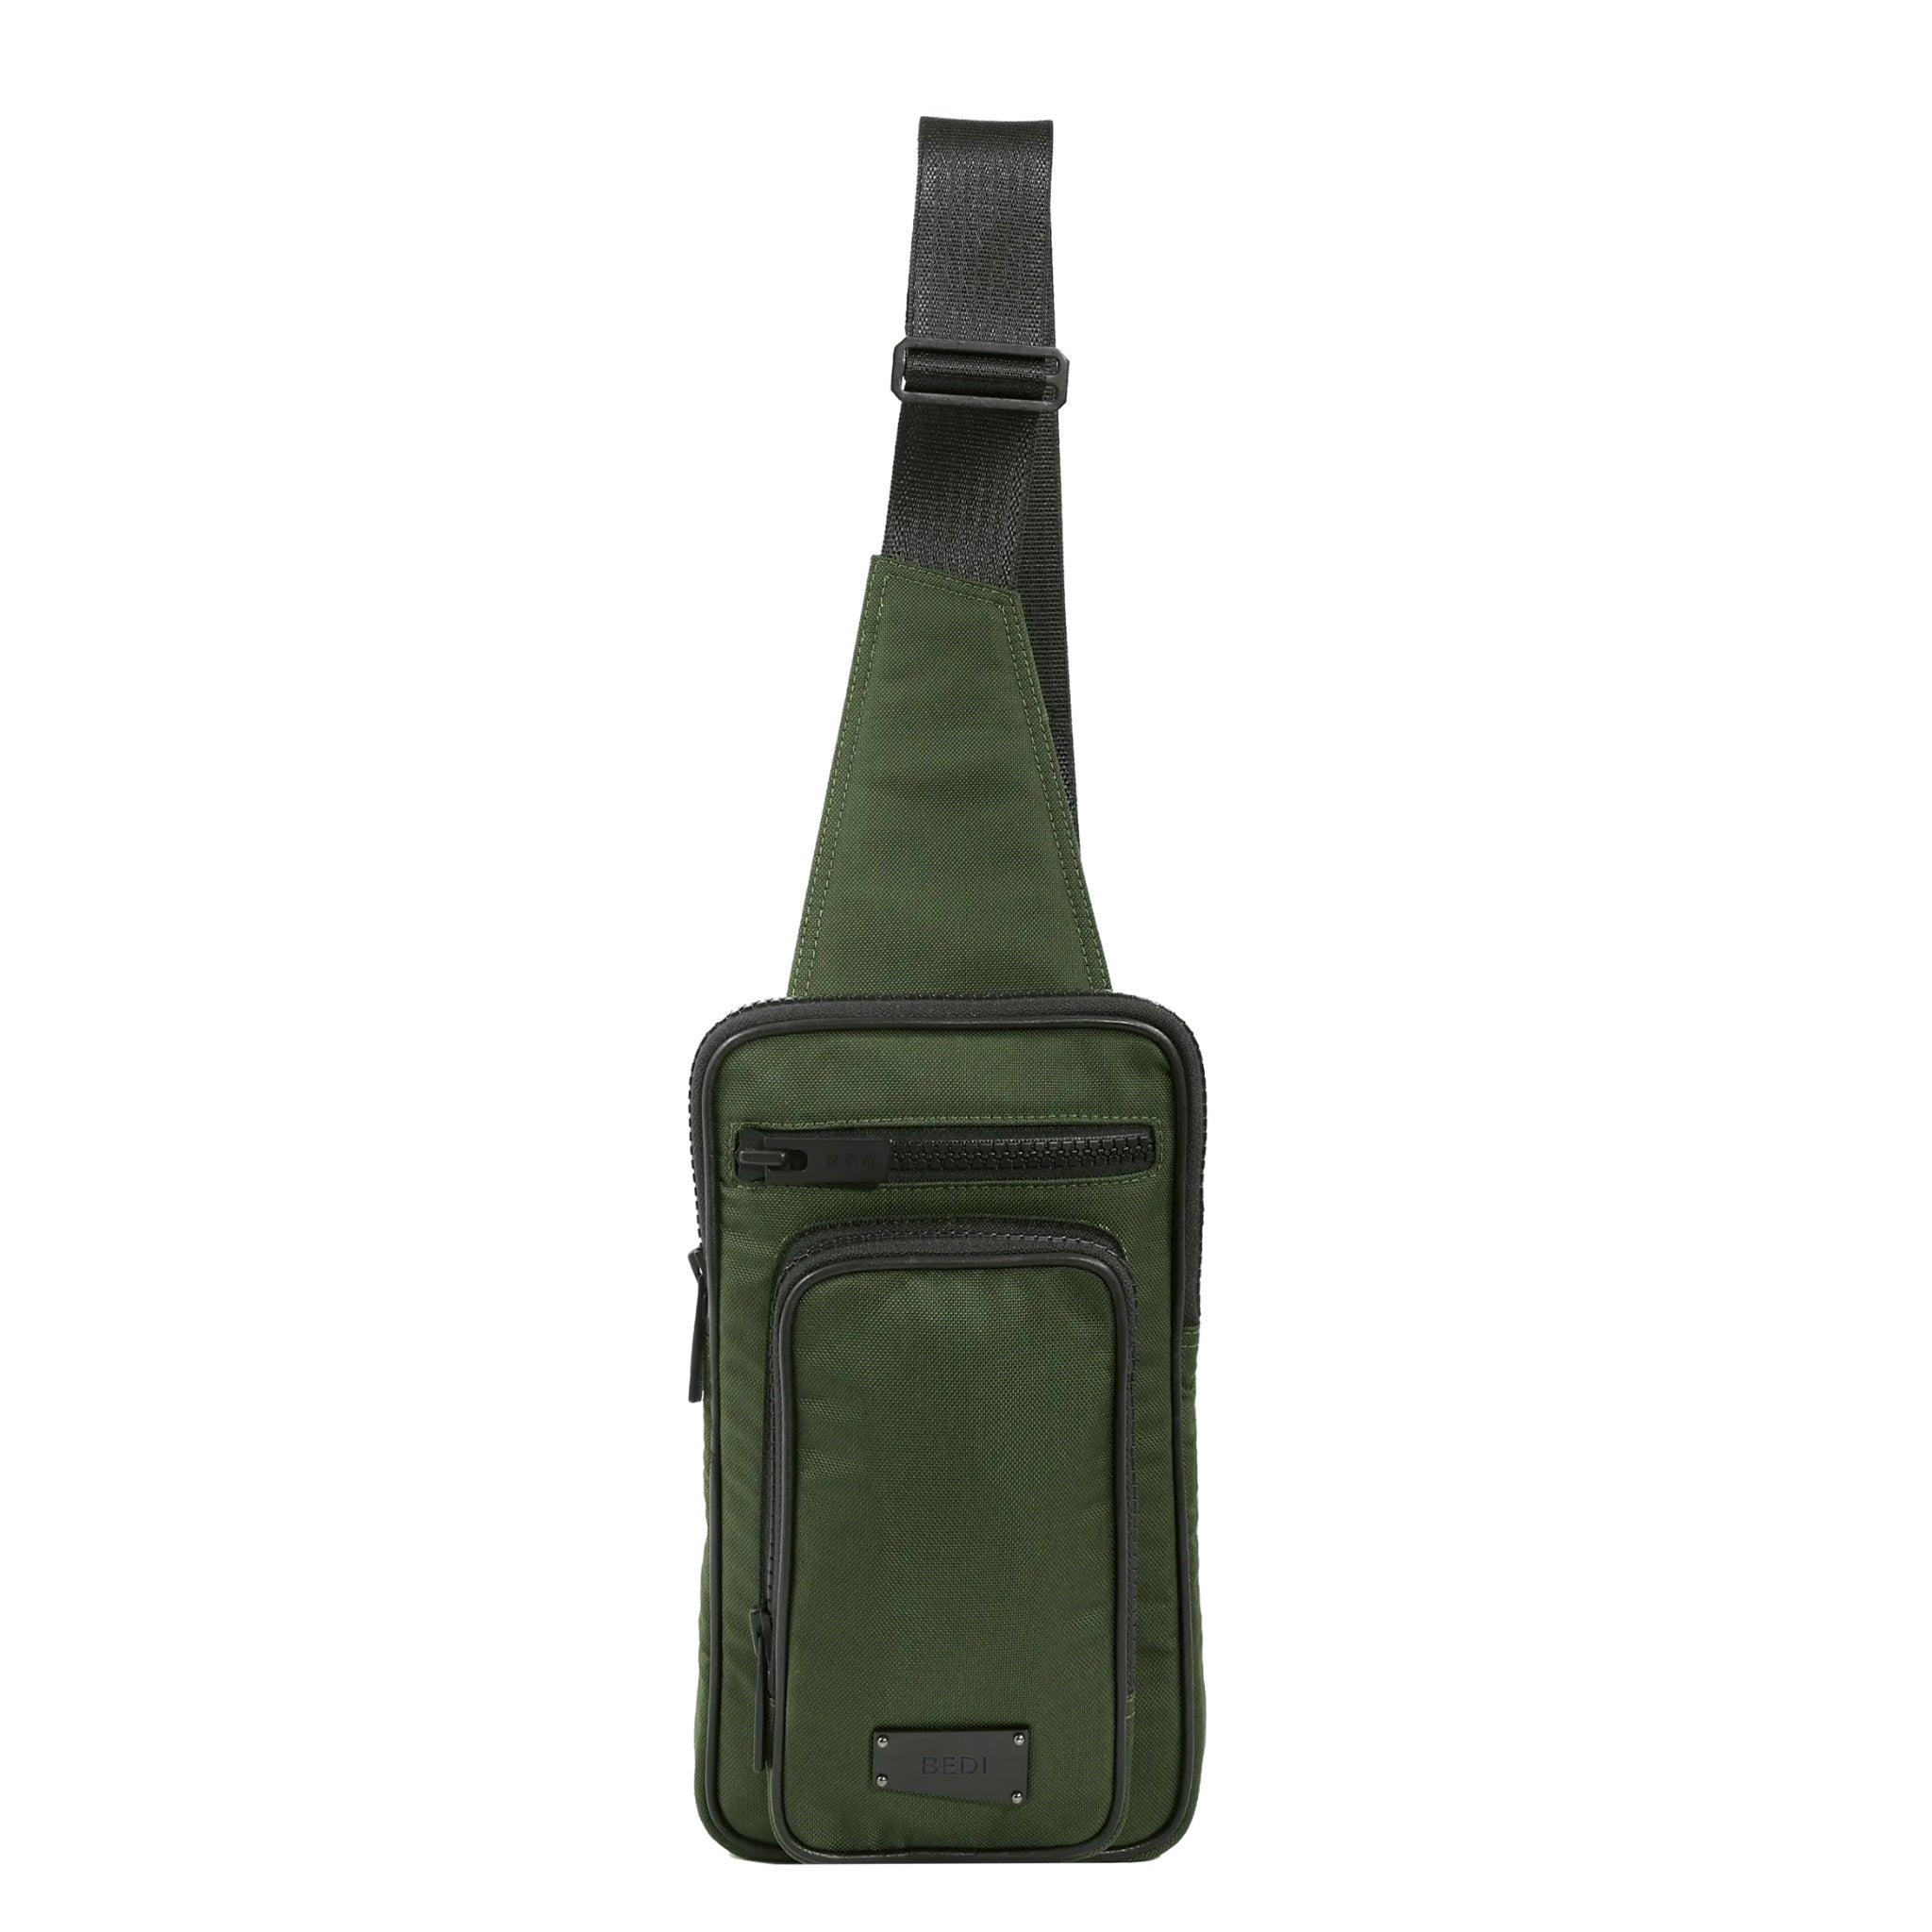 Front view of a utilitarian style sling in green upcycled nylon material on a white background